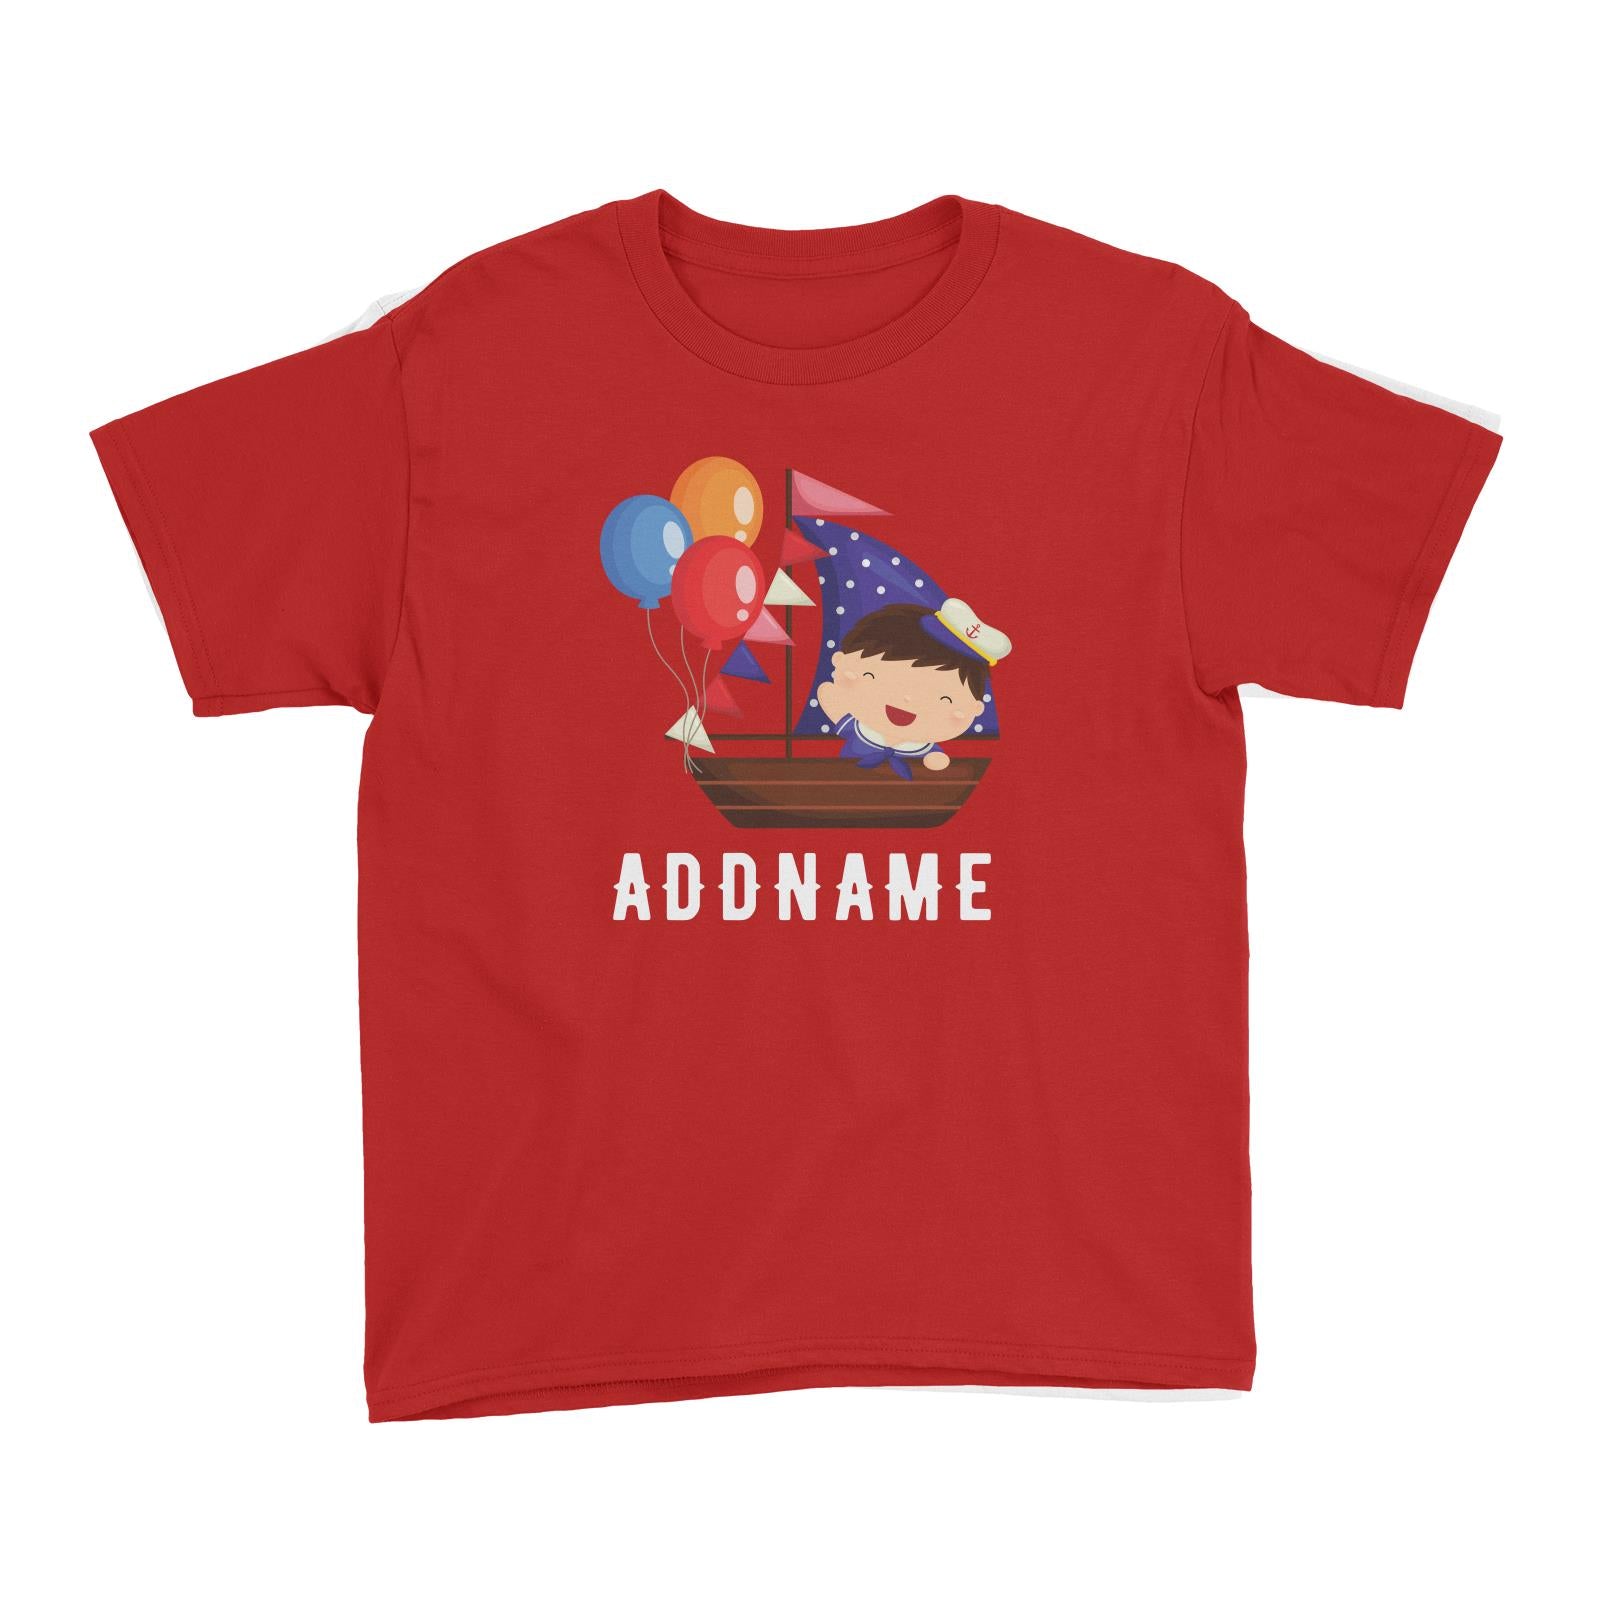 Birthday Sailor Baby Boy In Ship With Balloon Addname Kid's T-Shirt